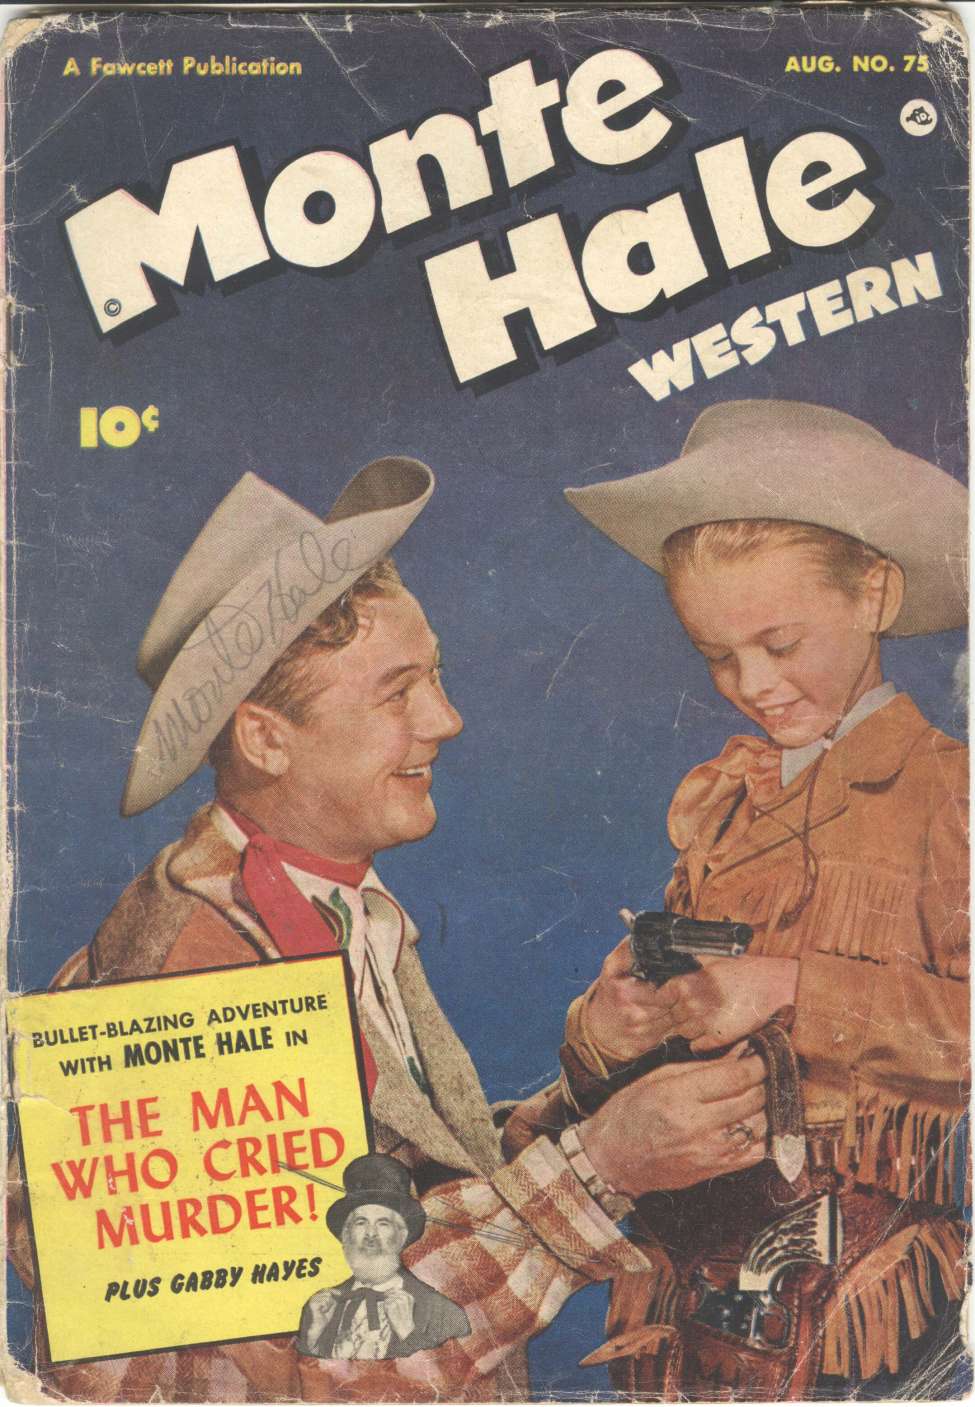 Book Cover For Monte Hale Western 75 - Version 1